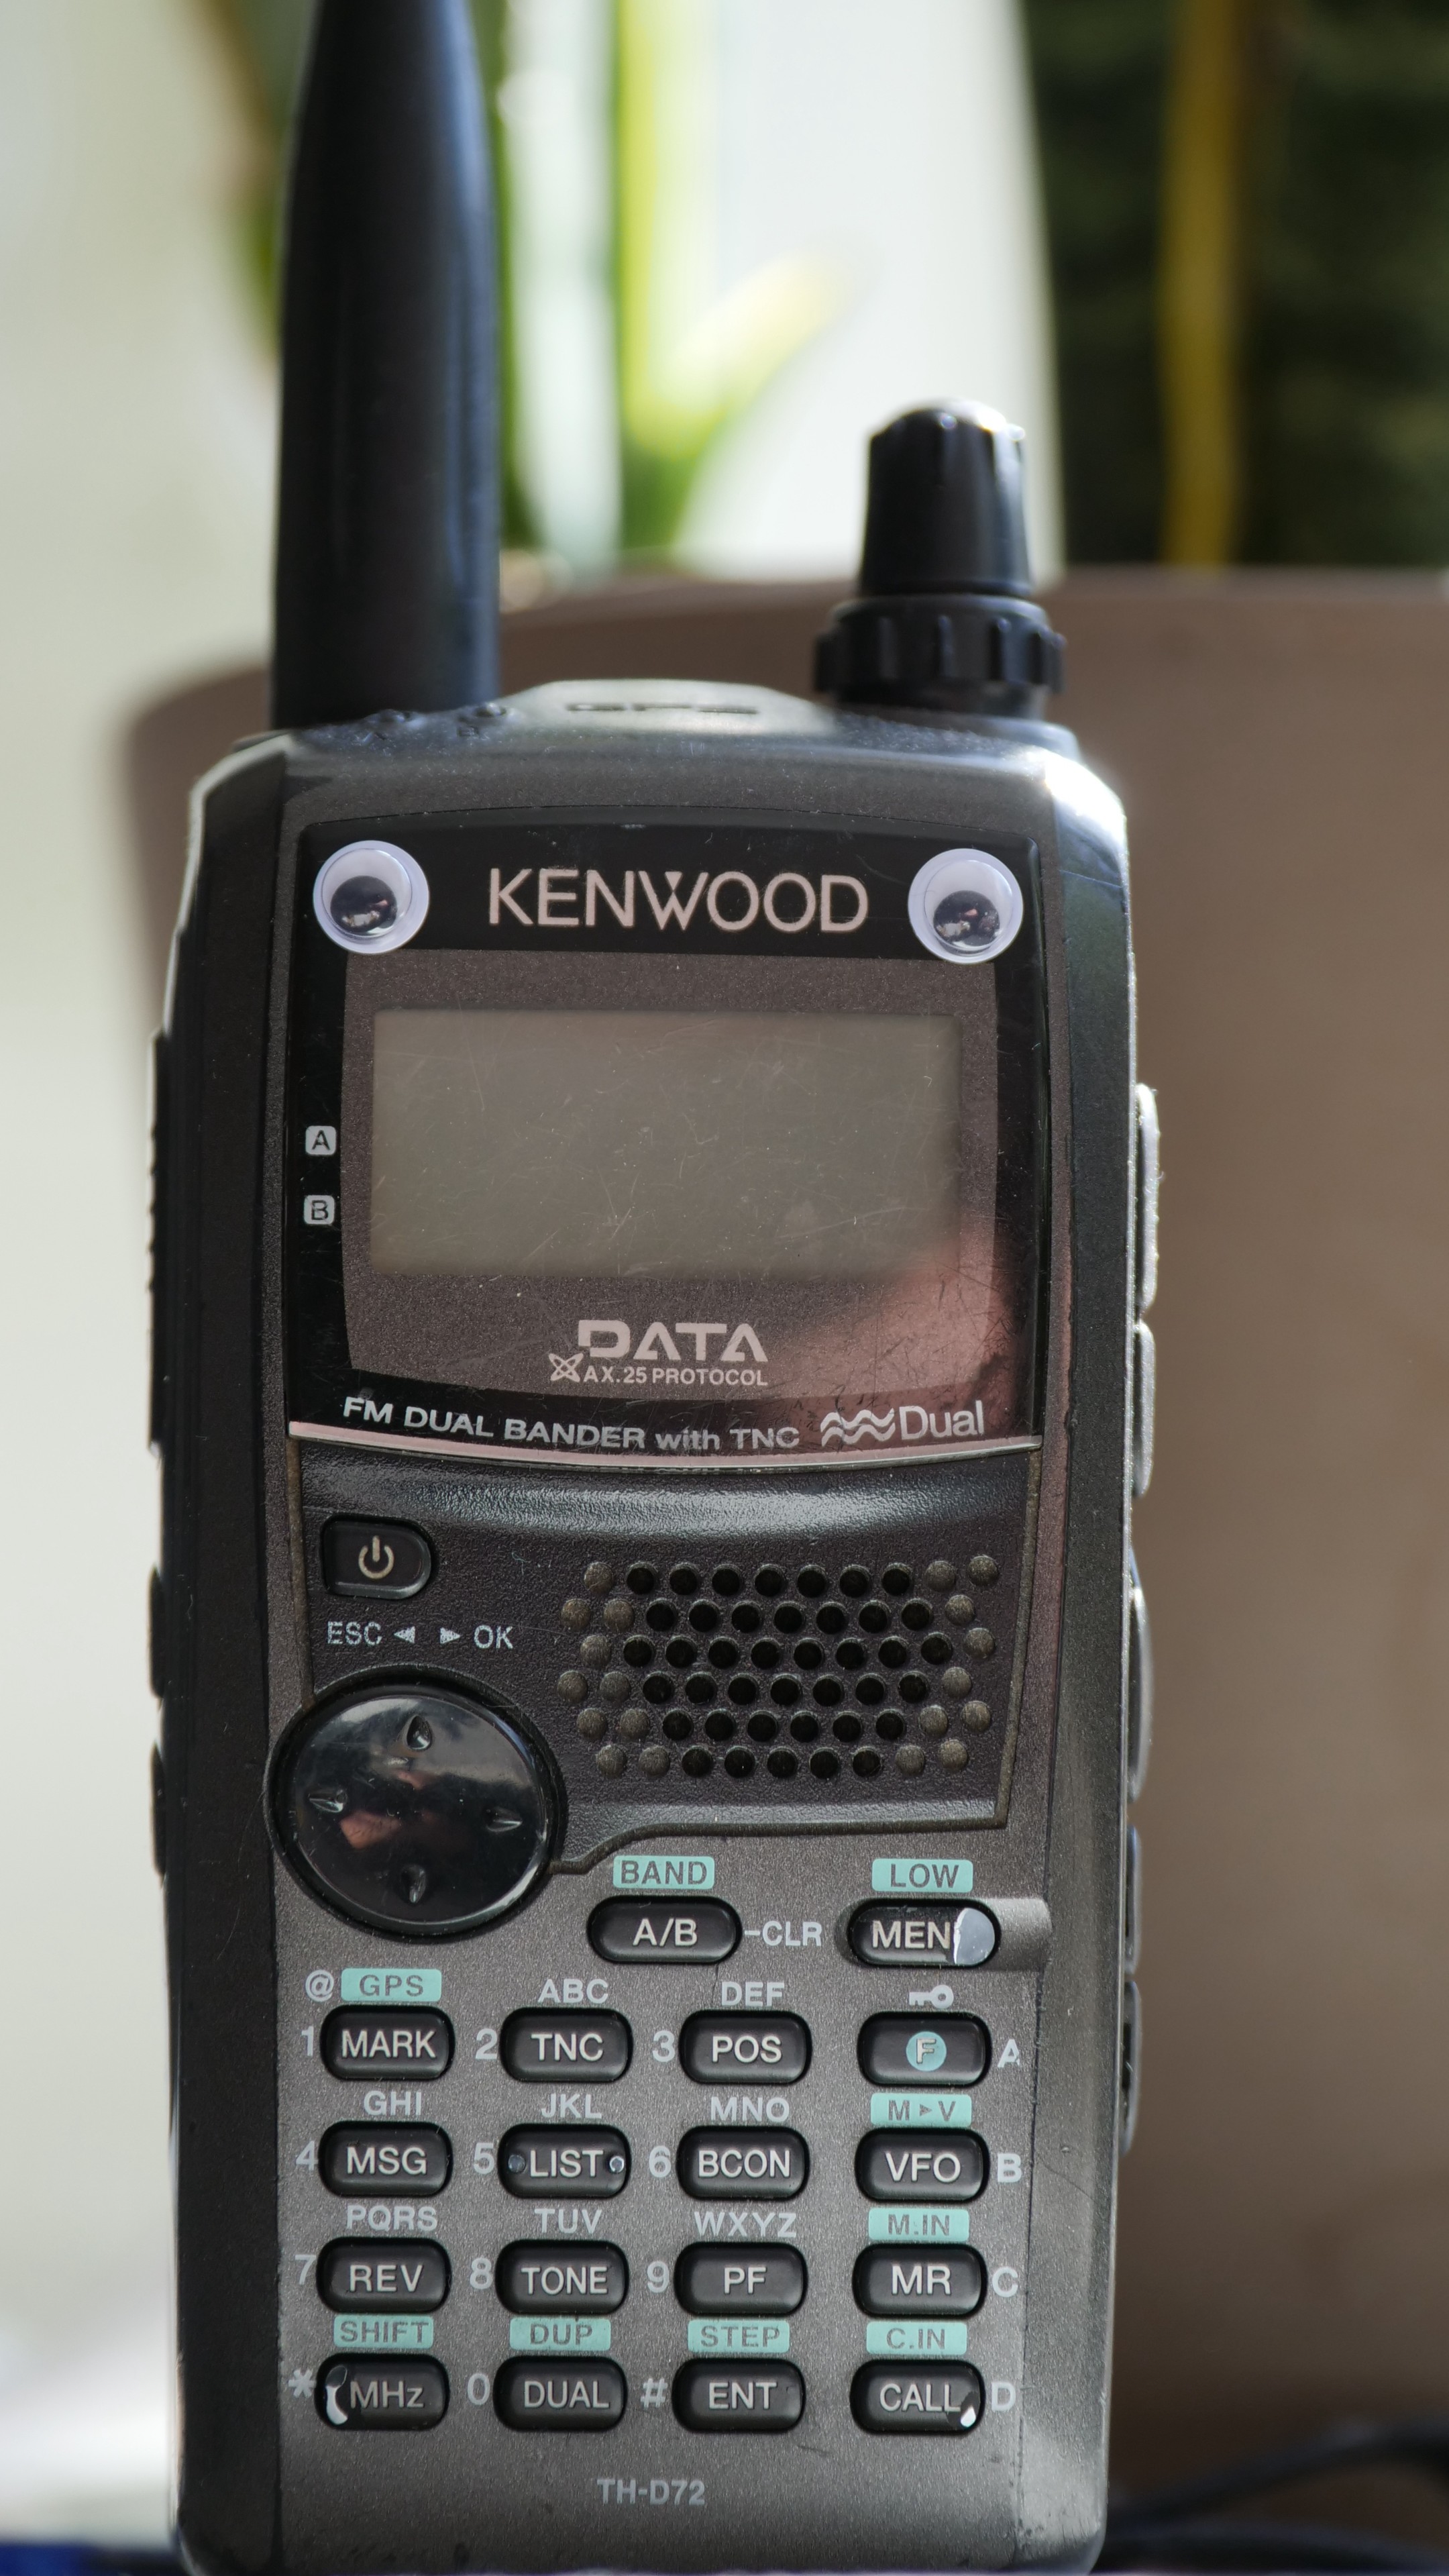 Kenwood TH-D72 hand held transceiver, pictured from the front, but now with googly eyes added on the top